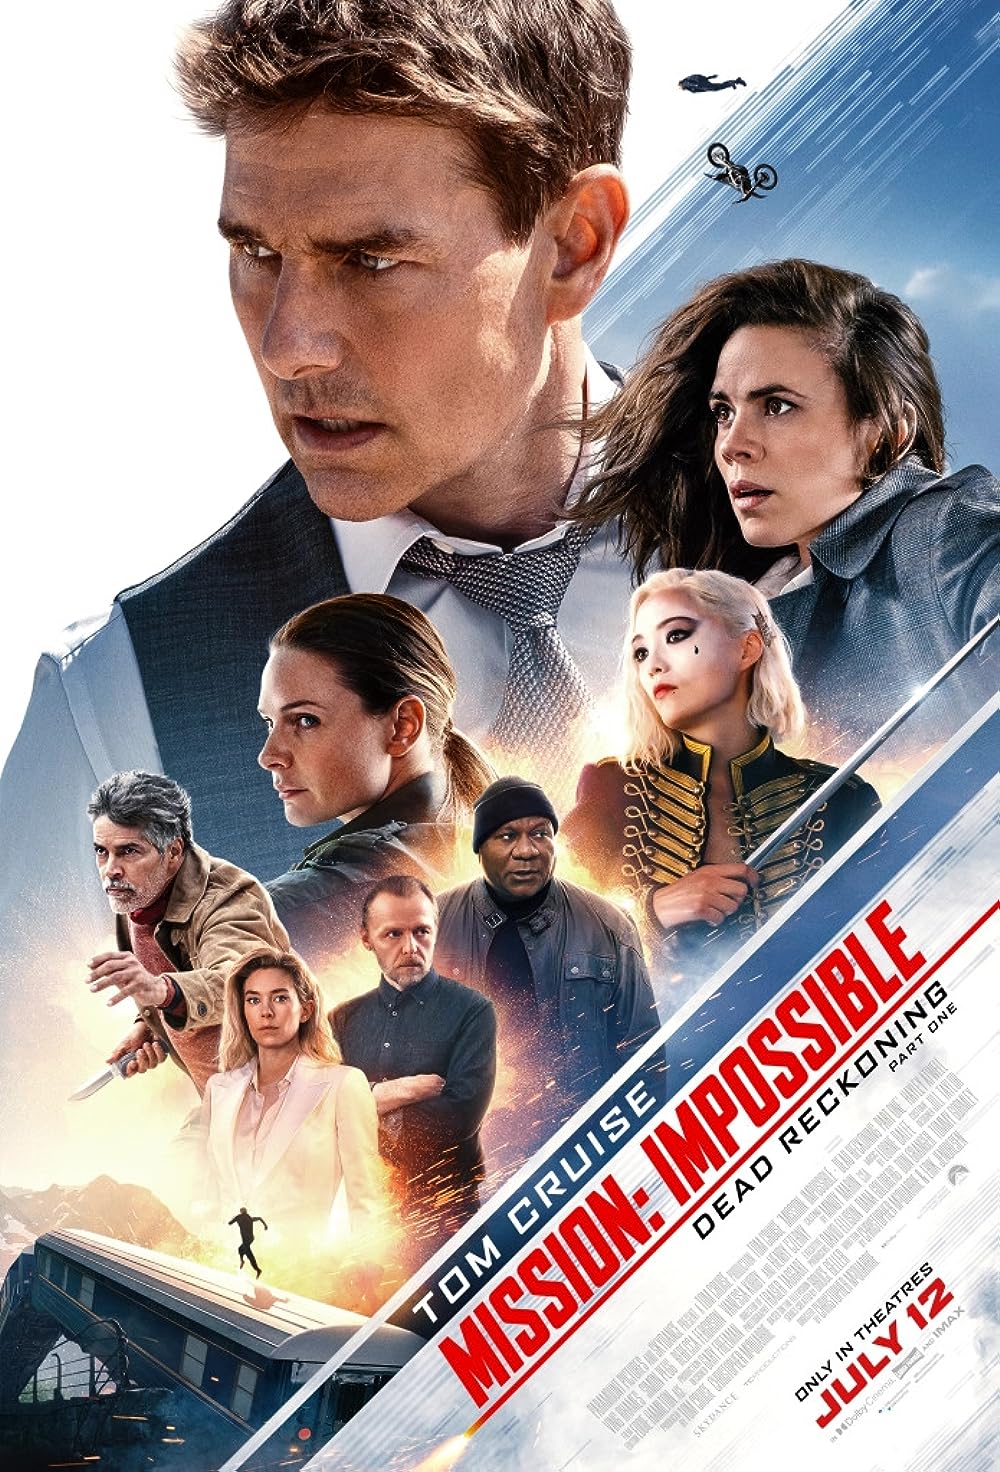 Download Mission: Impossible – Dead Reckoning Part One (2023) Dual Audio (Hindi-English) Movie HDRiP || 480p [700MB] || 720p [1.4GB] || 1080p [3.7GB]